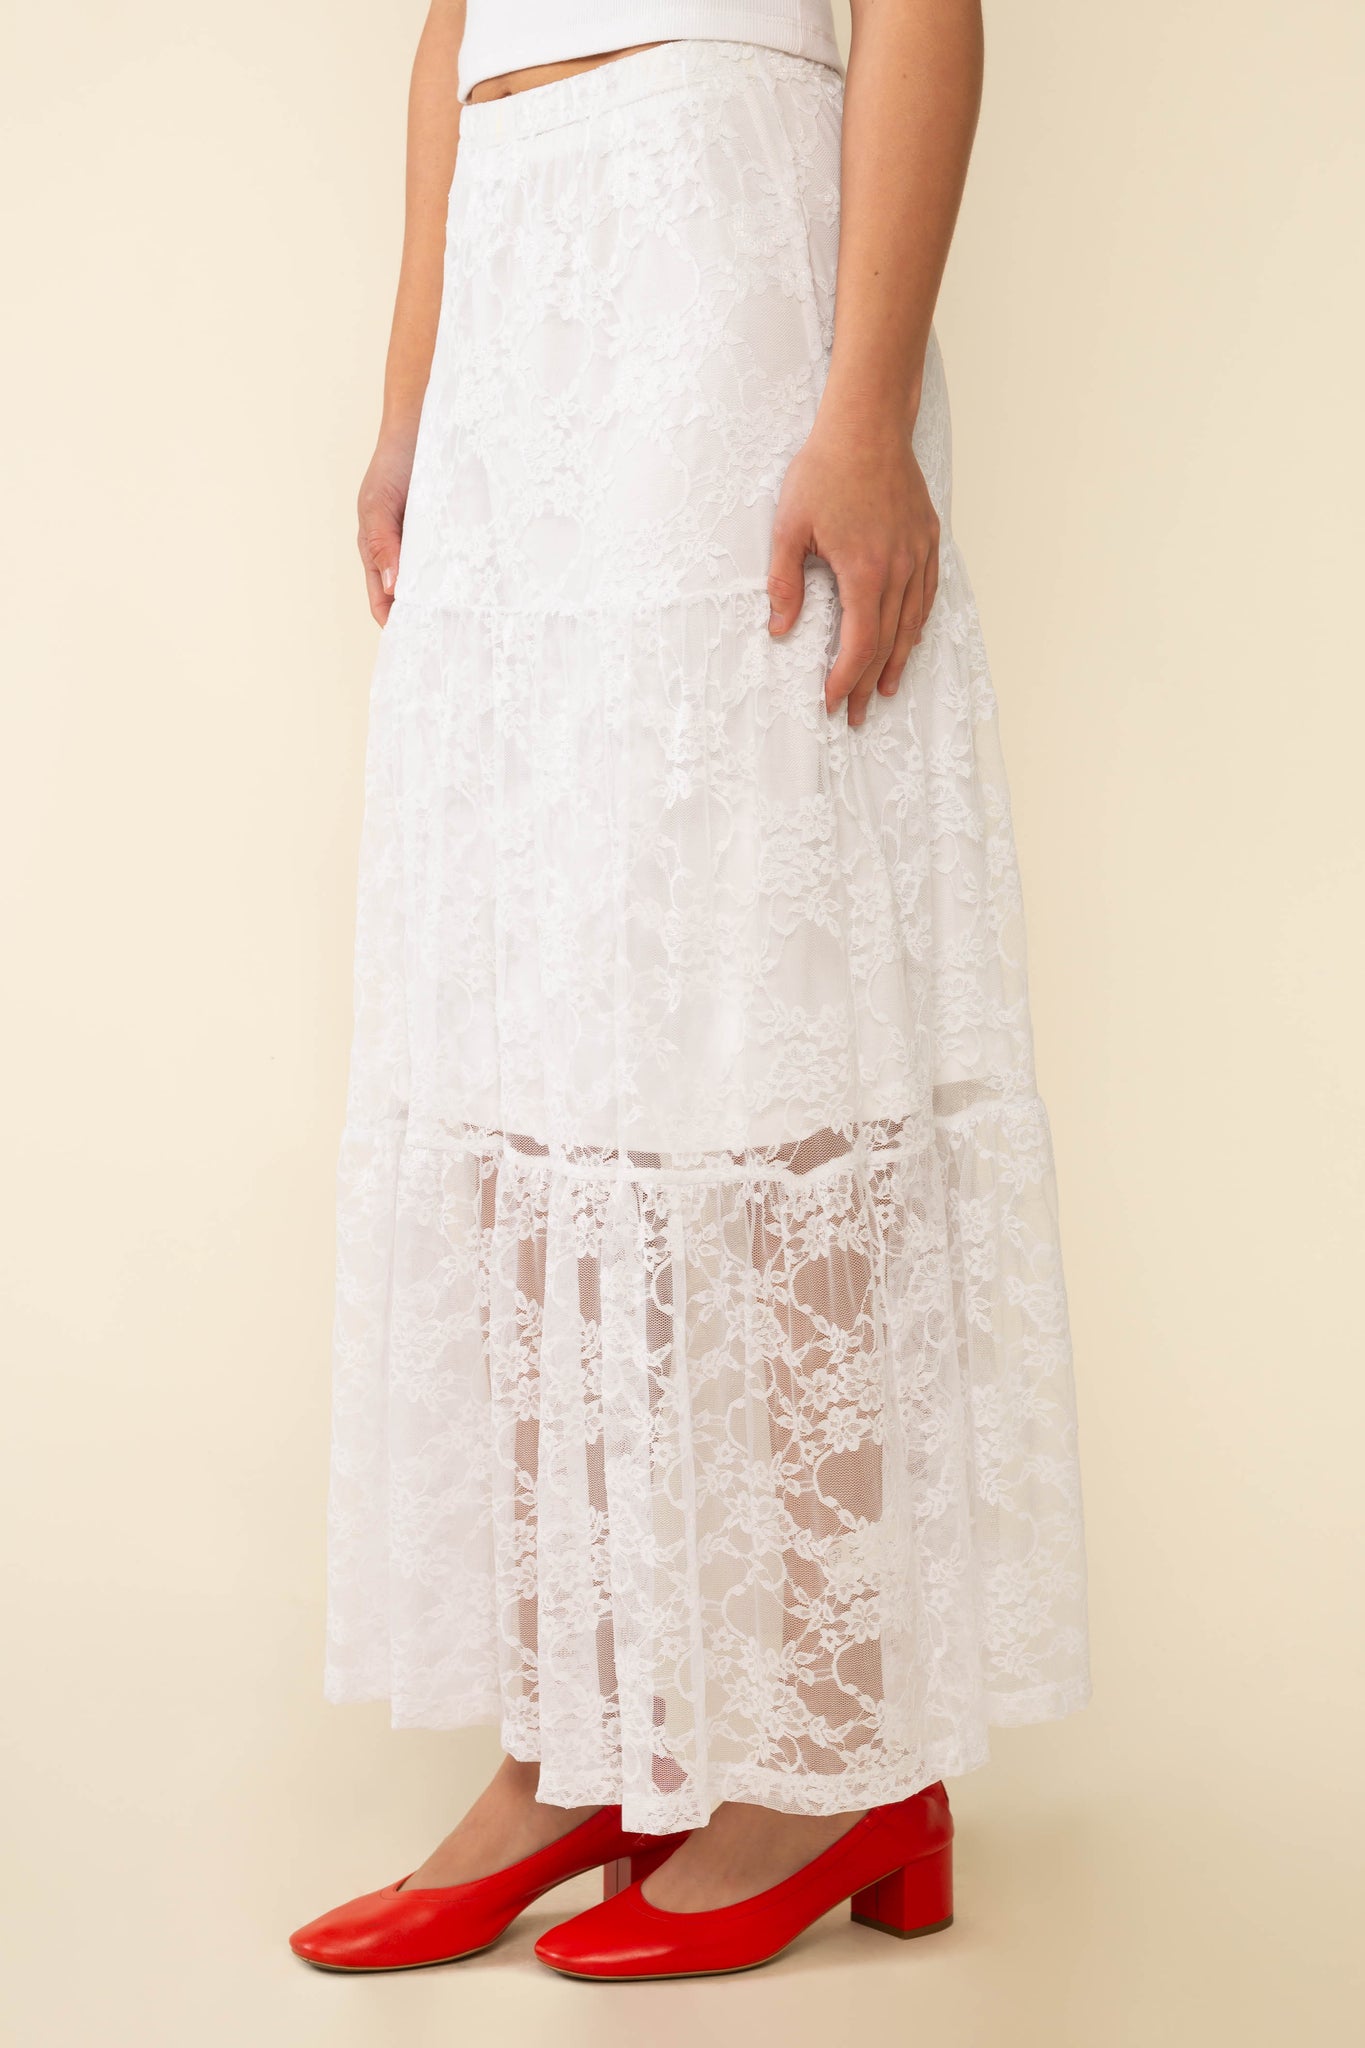 Lace Tiered Skirt with Slip